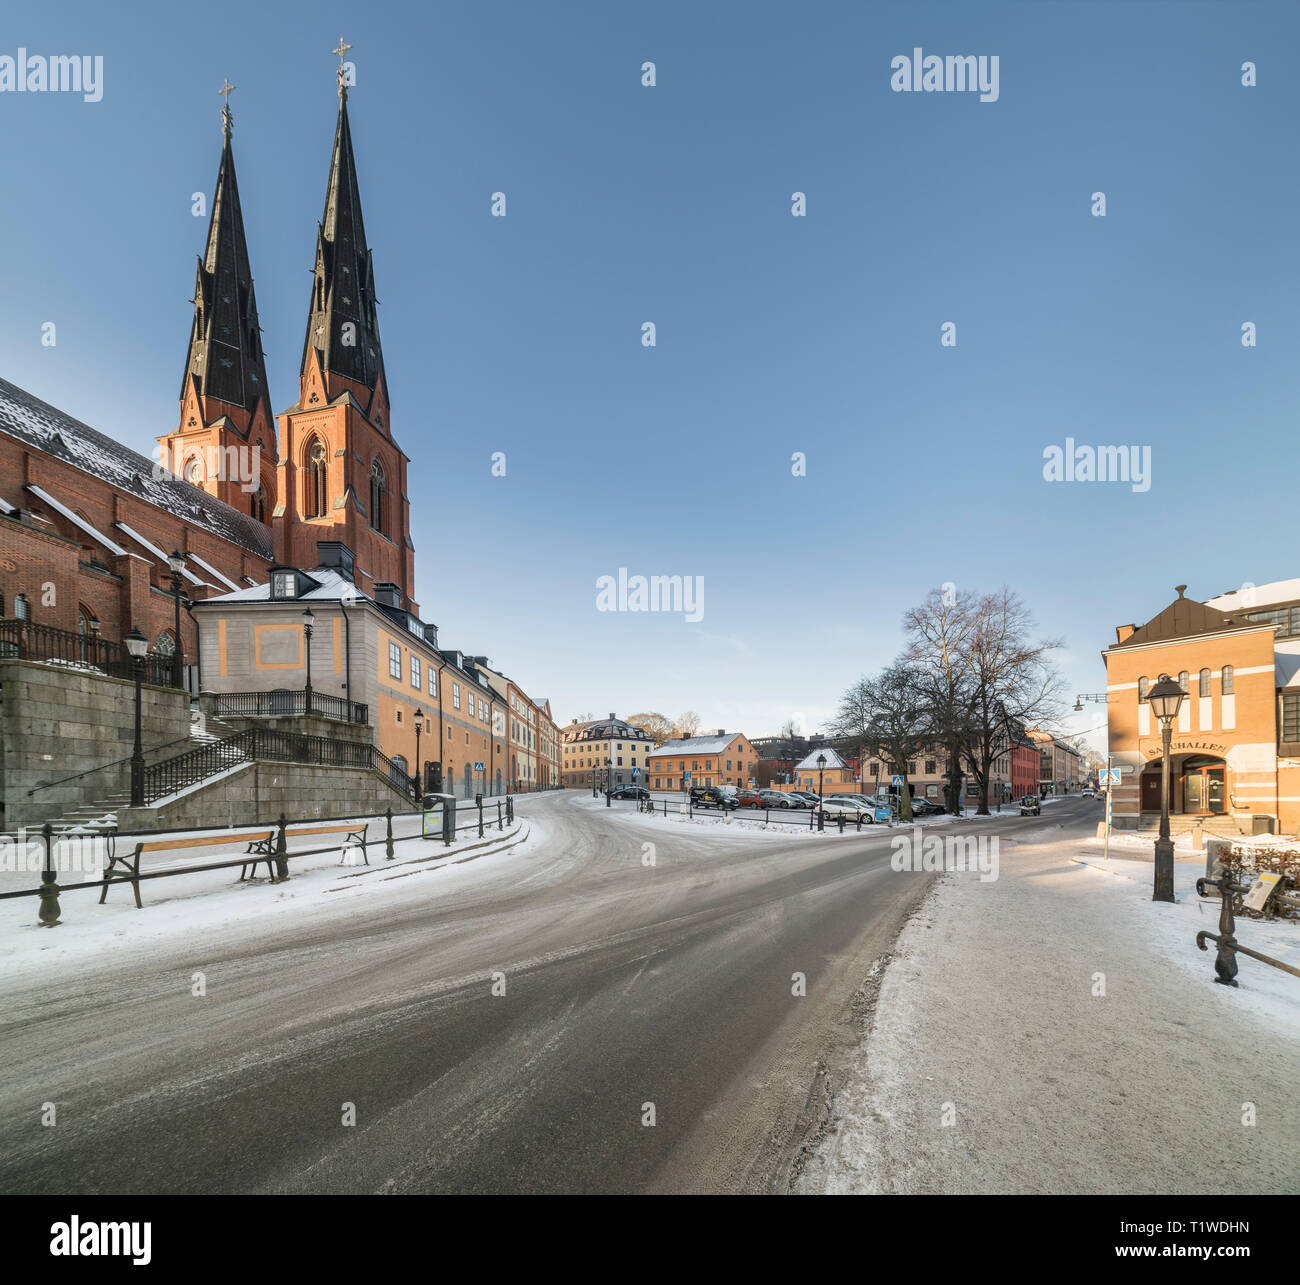 The Sankt Eriks torg square and the Cathedral (Domkyrkan). Uppsala, Sweden, Scandinavia Stock Photo